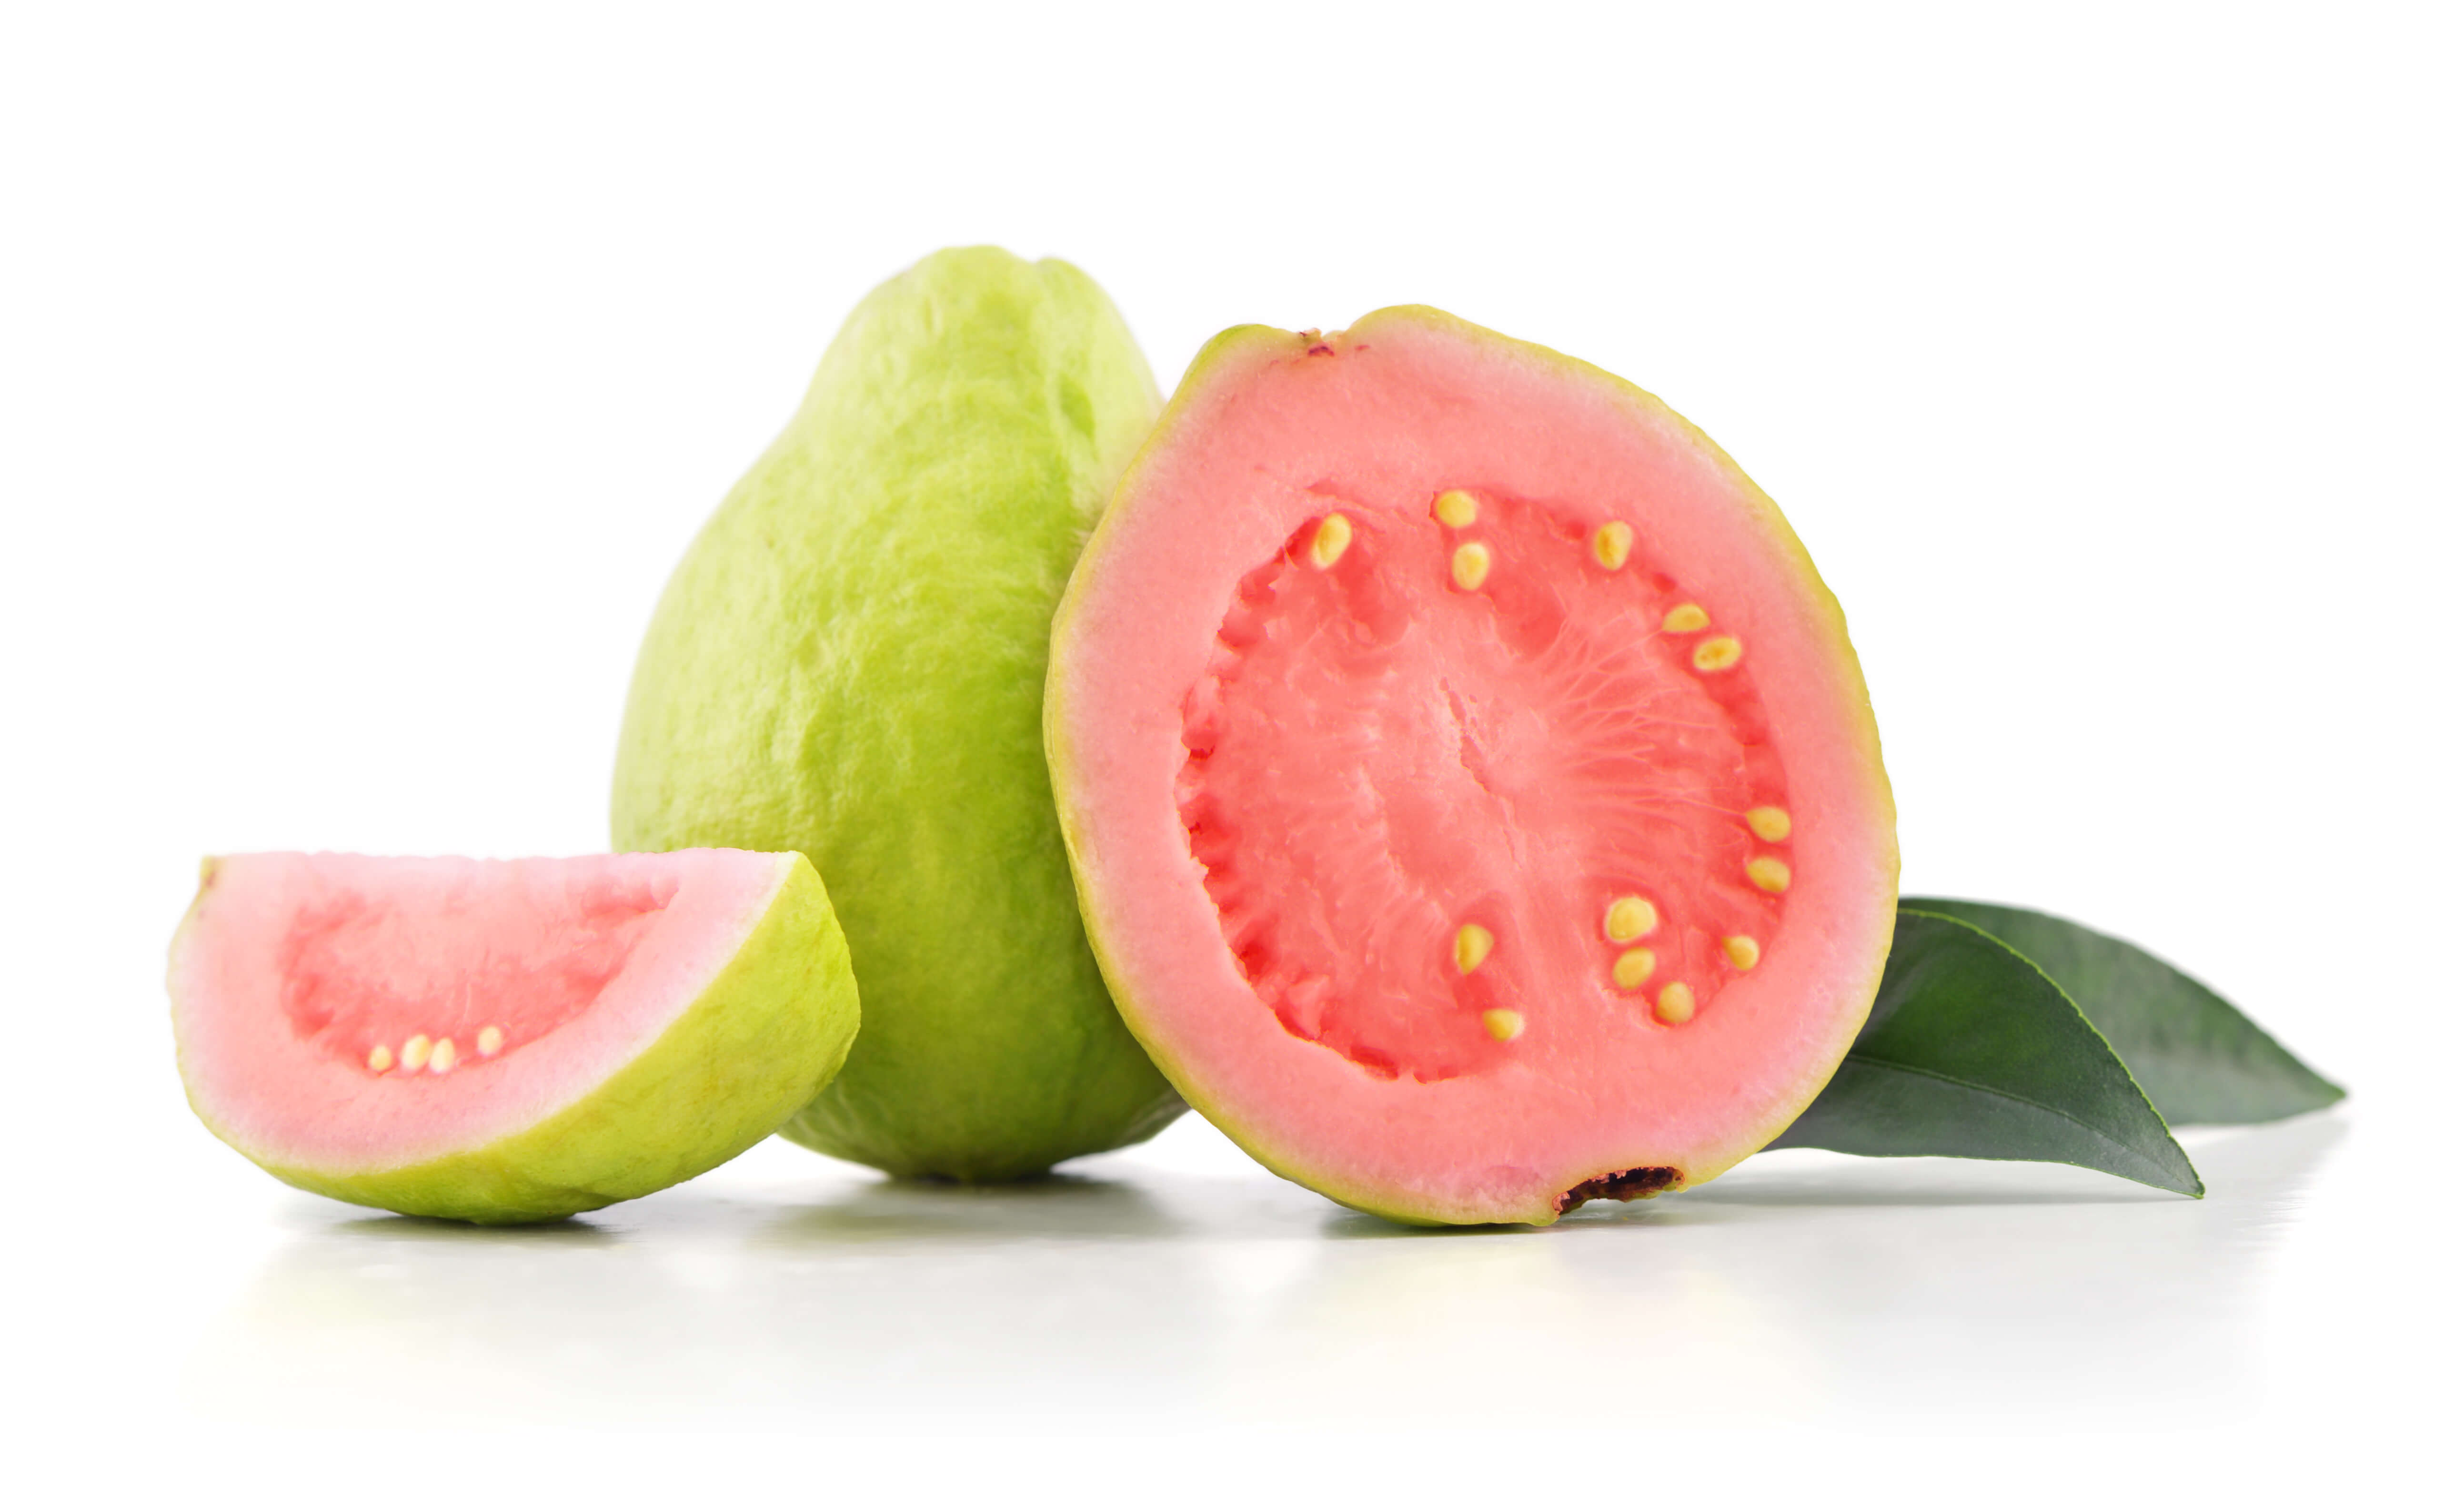 What Is a Guava?